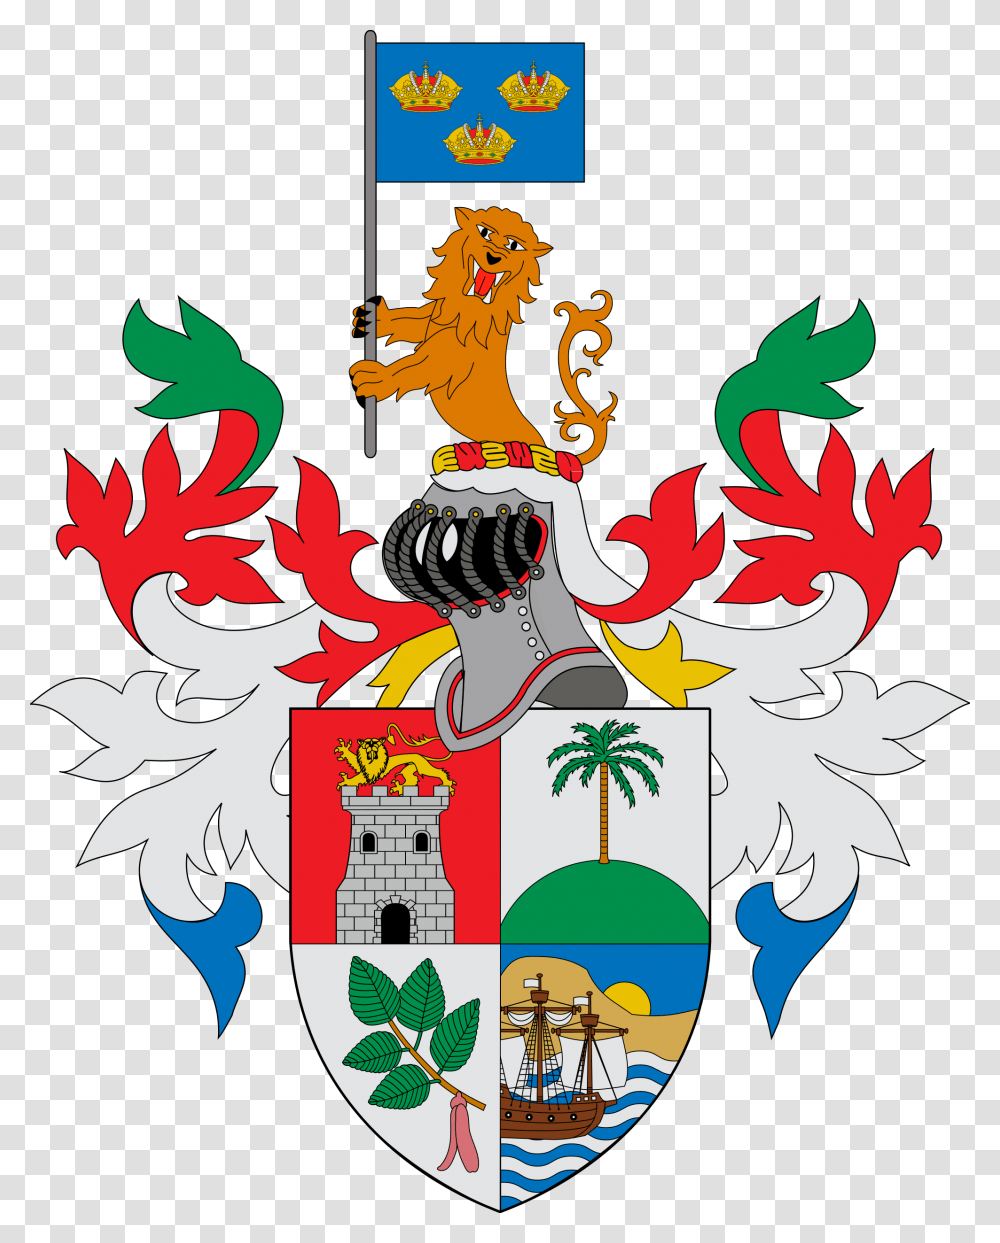 List Of Coats Of Arms Used In Singapore Coat Of Arms Singapore, Floral Design, Pattern Transparent Png